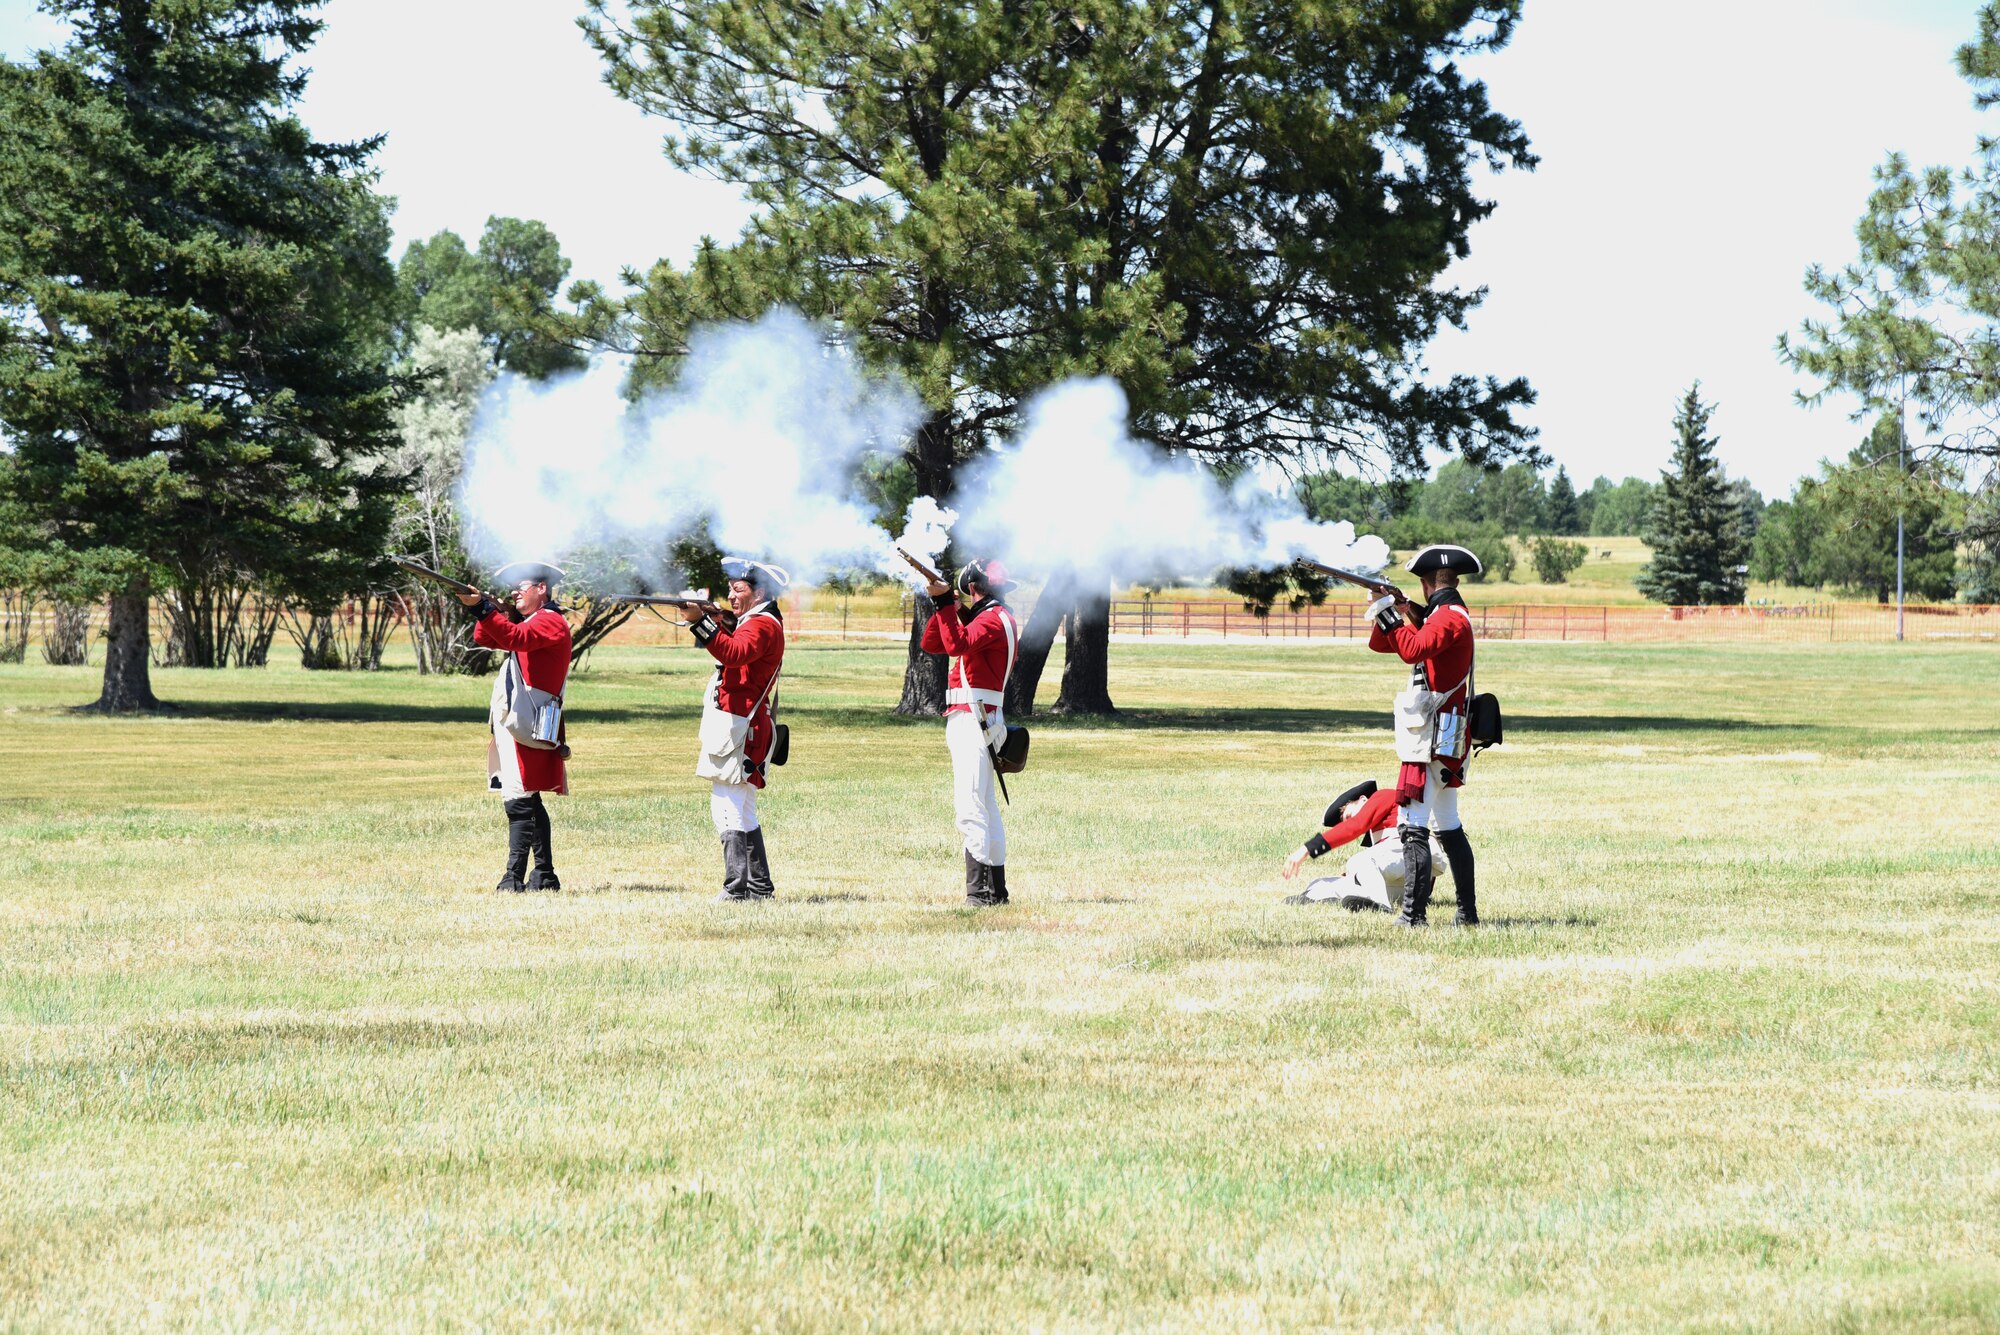 British Army Revolutionary War reenactors fire on Continental Soldiers during a demonstration at F.E. Warren Air Force Base, Wyo., July 20, 2019 as part of the annual Fort D.A. Russell Days. D. A. Russell Days allows the base to showcase the current mission while also giving visitors a realistic glimpse of the base’s history. This year marks the 25th iteration of the event. (U.S. Air Force photo by Glenn S. Robertson)